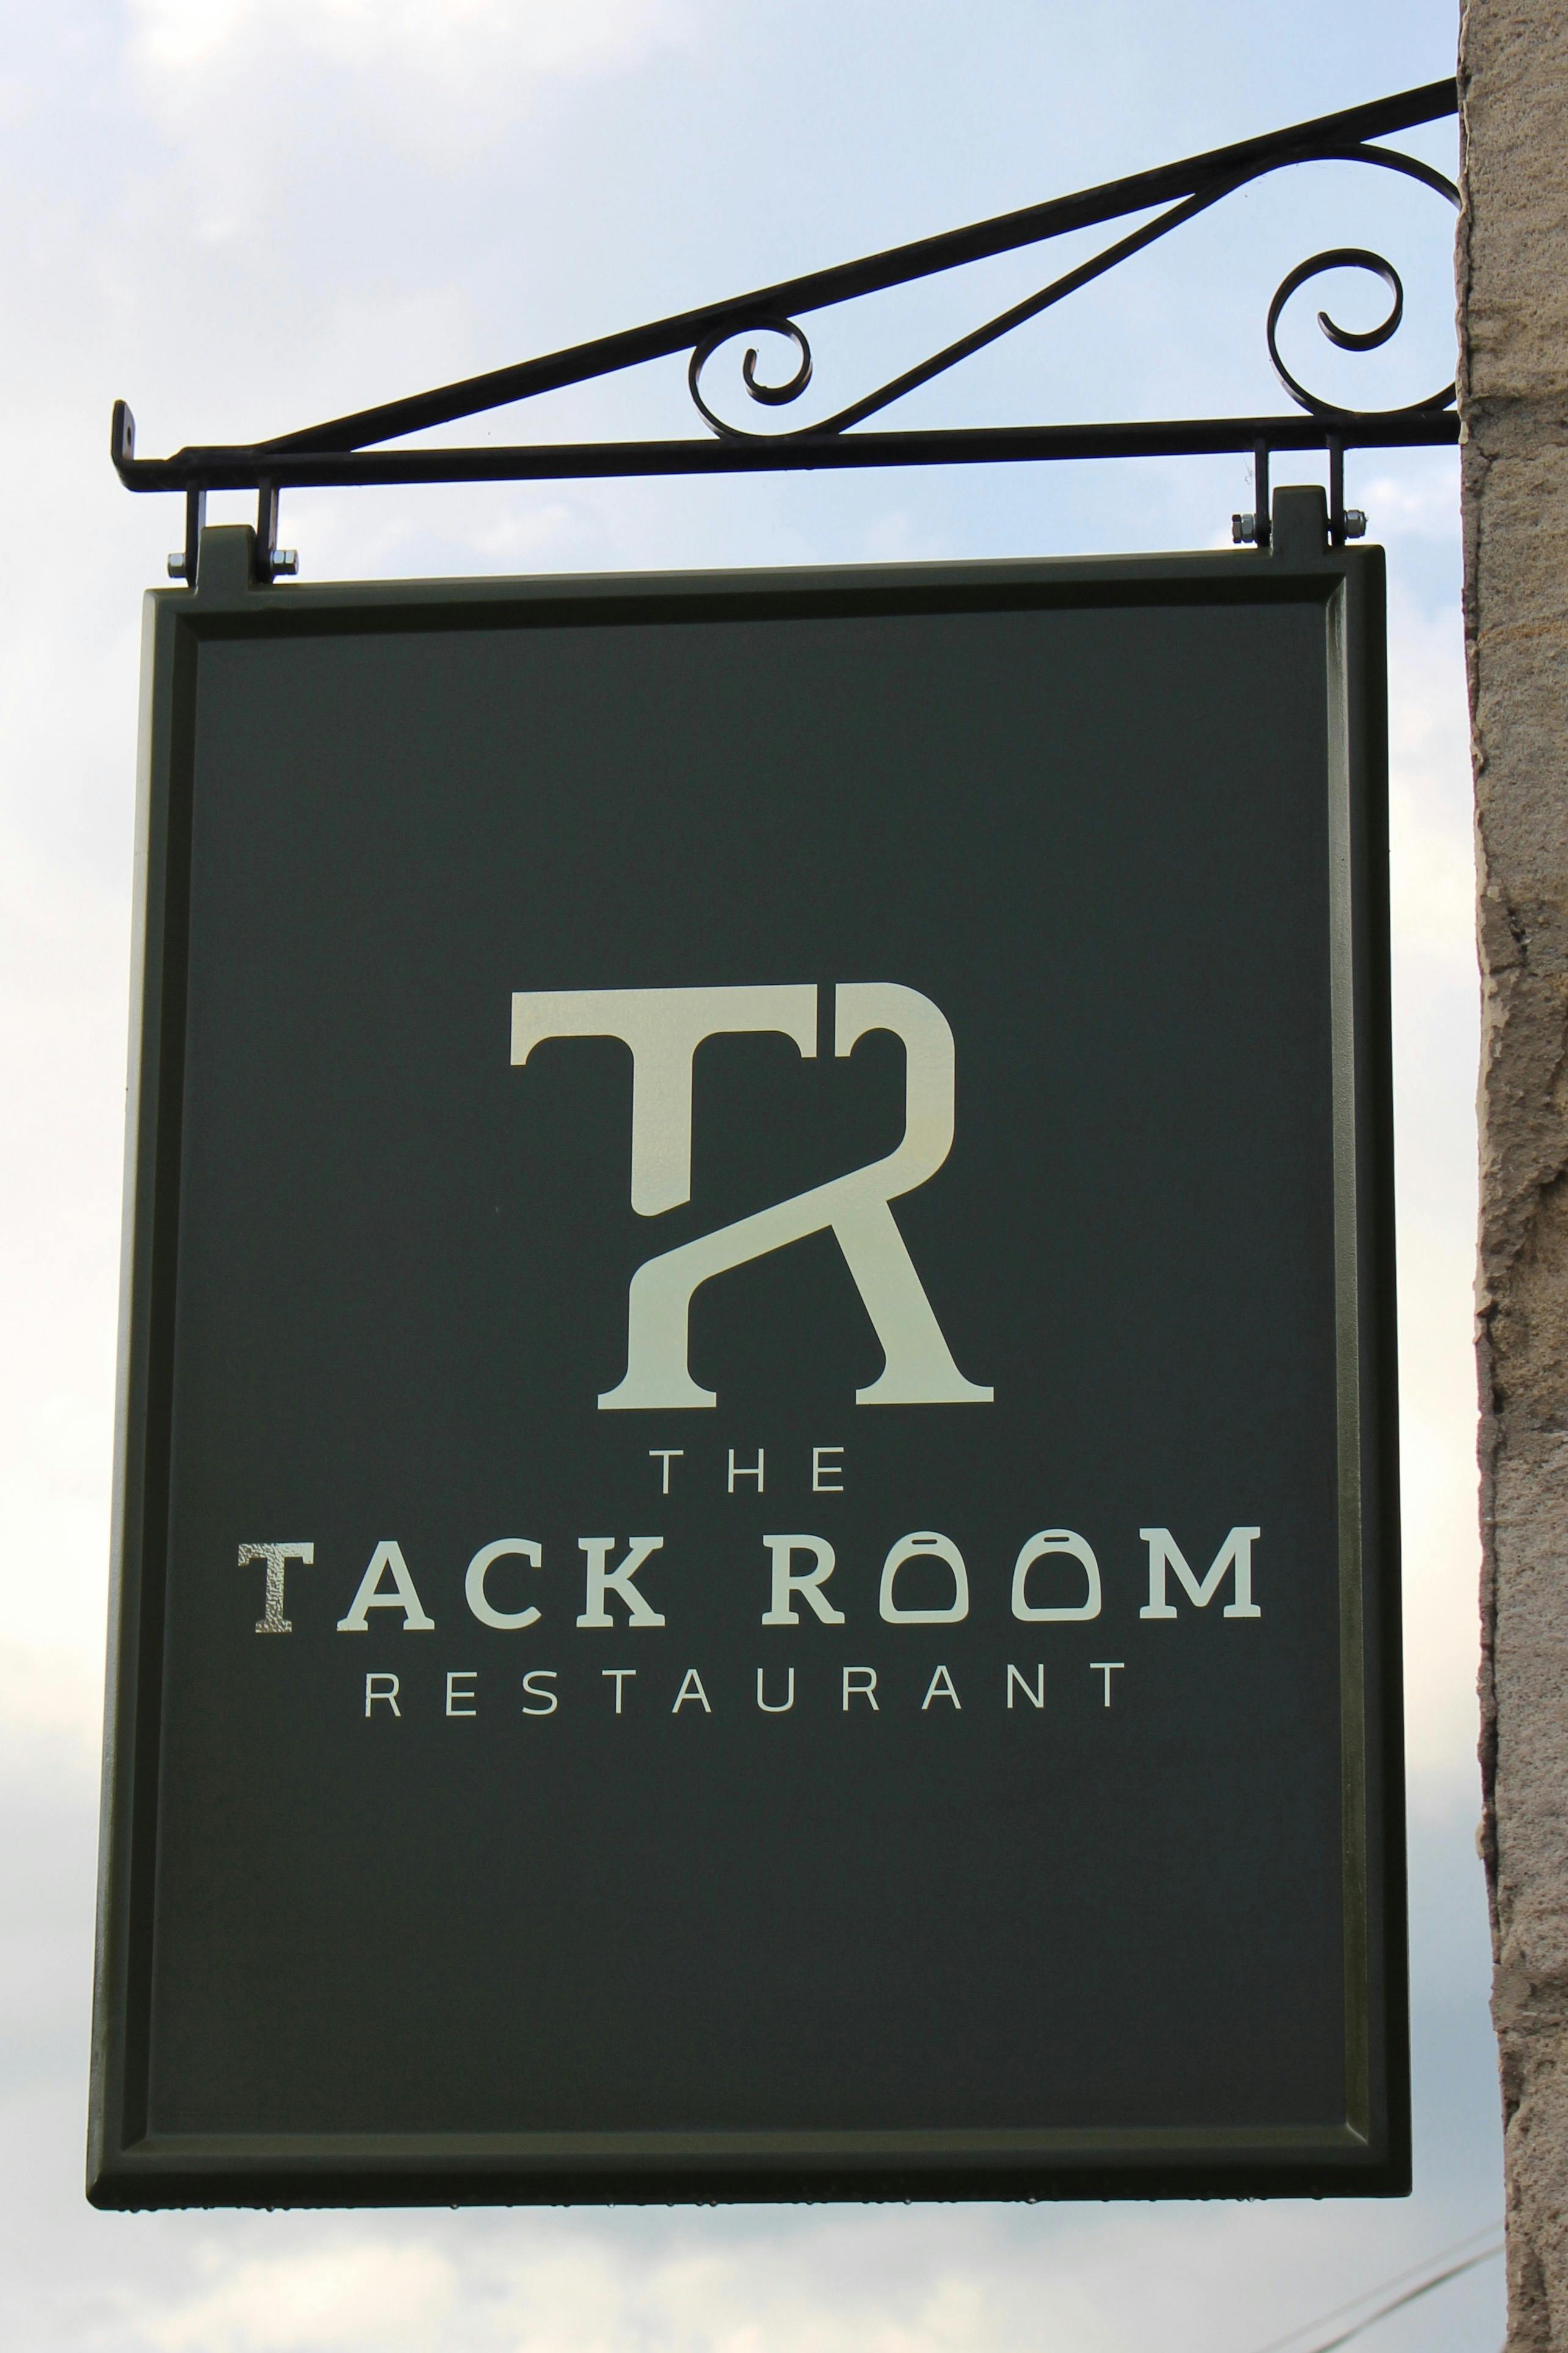 The Tack Room Restaurant & Bar, boutique continental dining in Middleham, Yorkshire Dales, high quality food and service